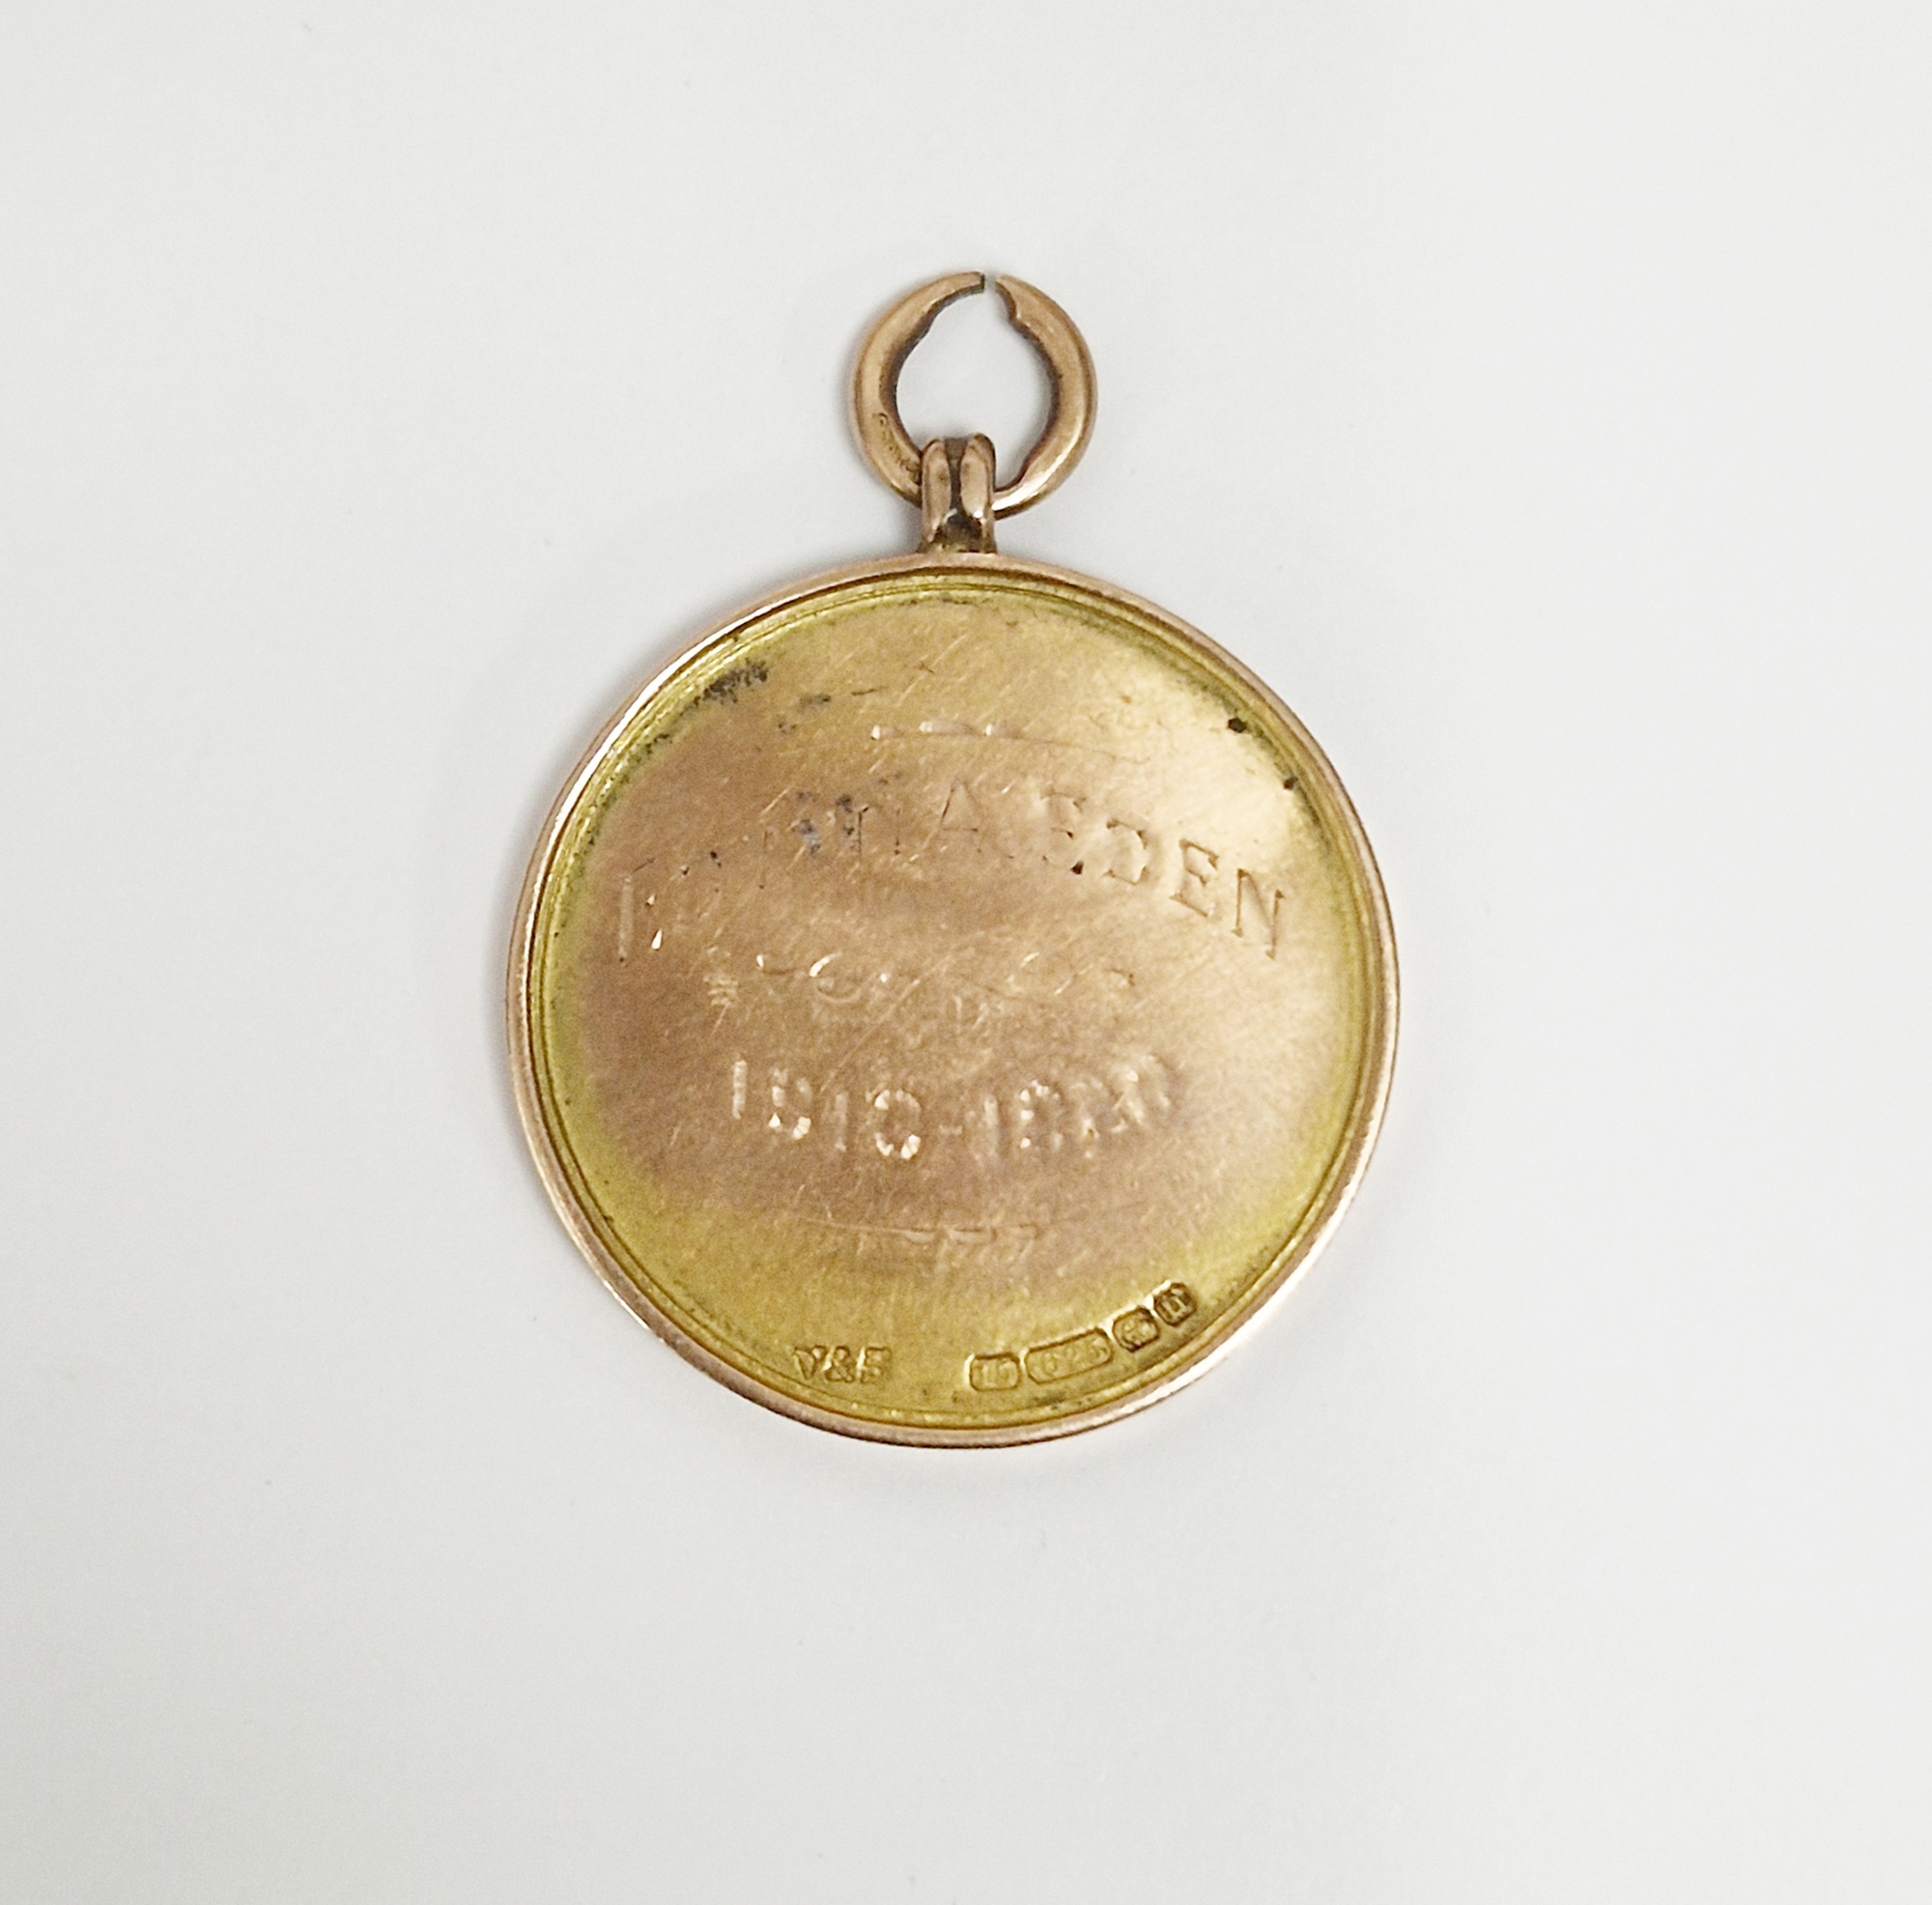 Essex County Football Association 15ct gold Long Service medallions, 1930's, awarded to Teddy - Image 2 of 2